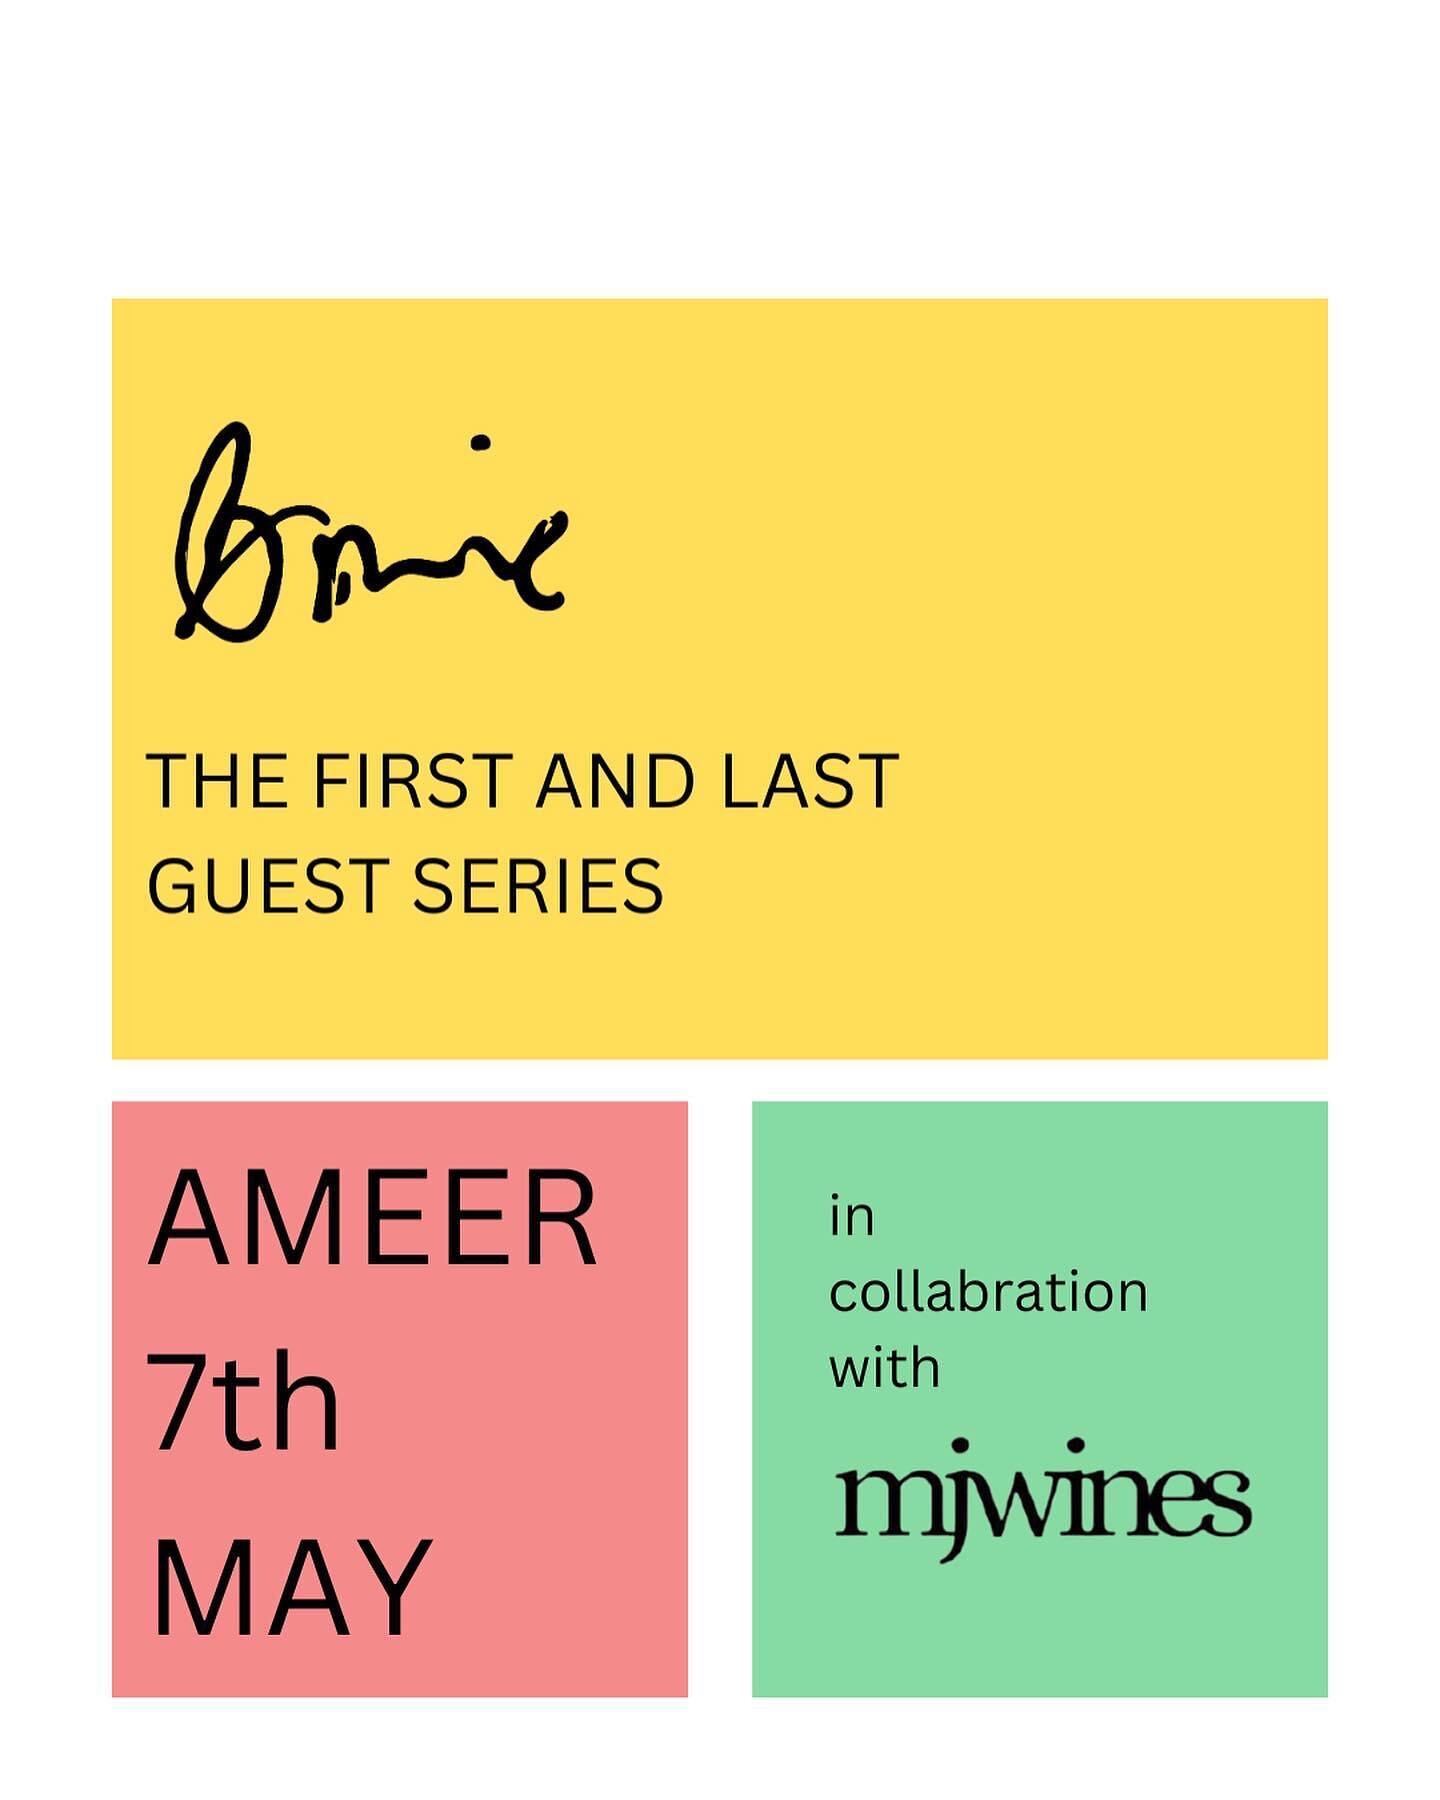 Join us this 7th may in our first and very last guest series with Ameer before we shut off operations at @groundstory_stories. 

Singaporean chef with an inspiring work history: He started his apprenticeship at Cure Restaurant and worked at Meta Rest